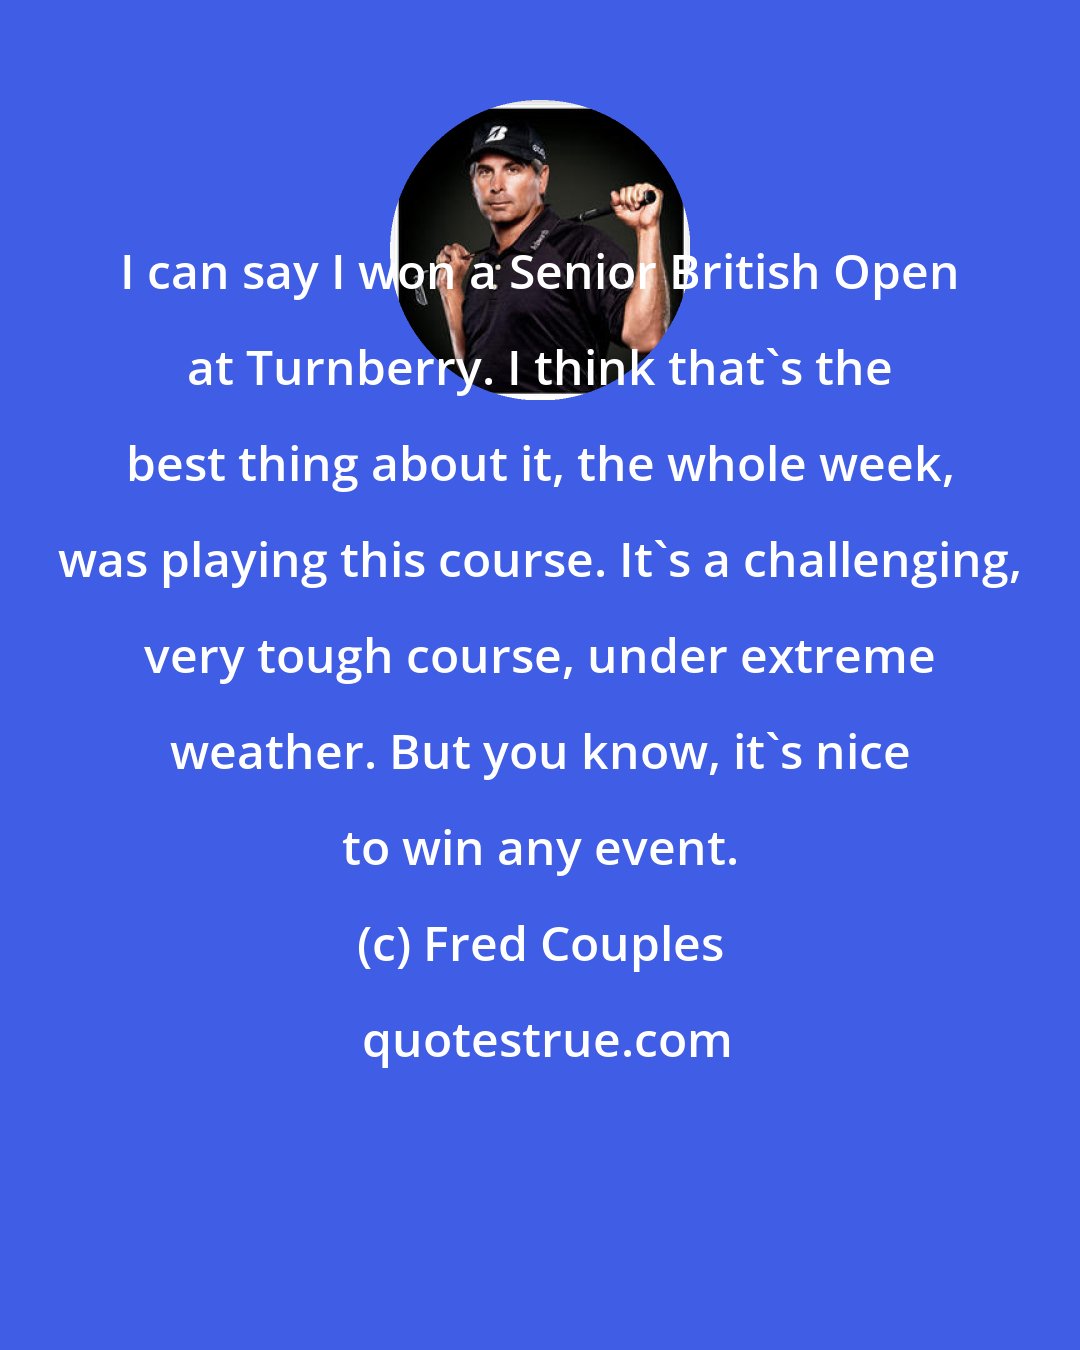 Fred Couples: I can say I won a Senior British Open at Turnberry. I think that's the best thing about it, the whole week, was playing this course. It's a challenging, very tough course, under extreme weather. But you know, it's nice to win any event.